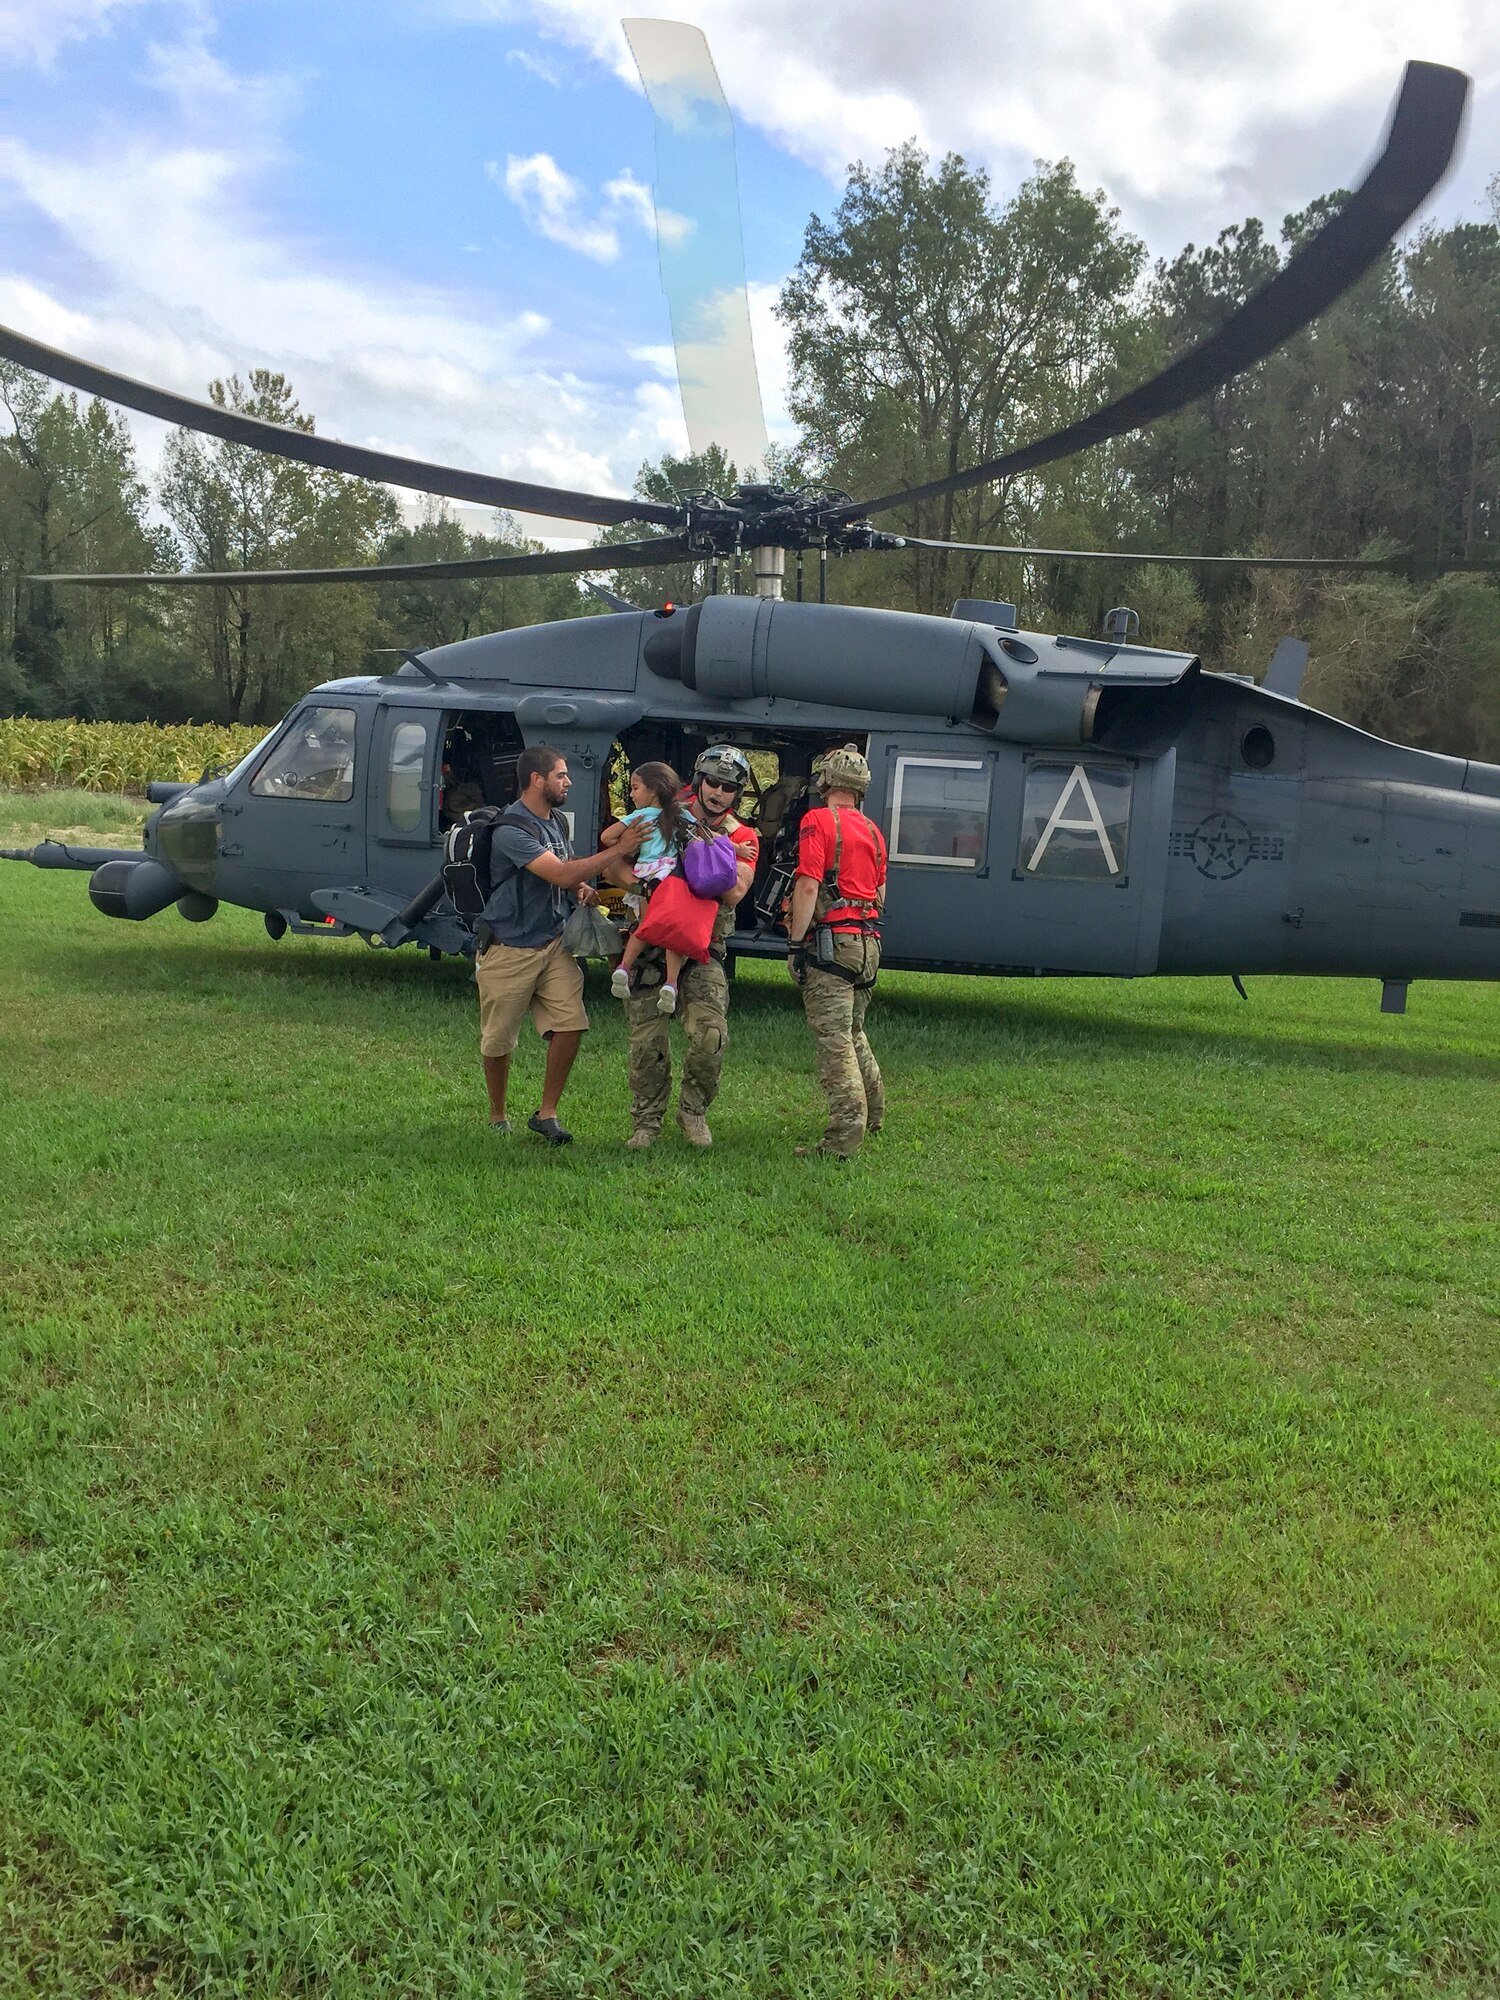 Alaska Air National Guardsmen from the 176th Wing’s 212th Rescue Squadron assist with recovering isolated flood survivors via a California ANG’s HH-60 Pavehawk helicopter crewed by members of the 210th RQS near Sampson County, N.C., Sept. 17, 2018. (Courtesy photo)